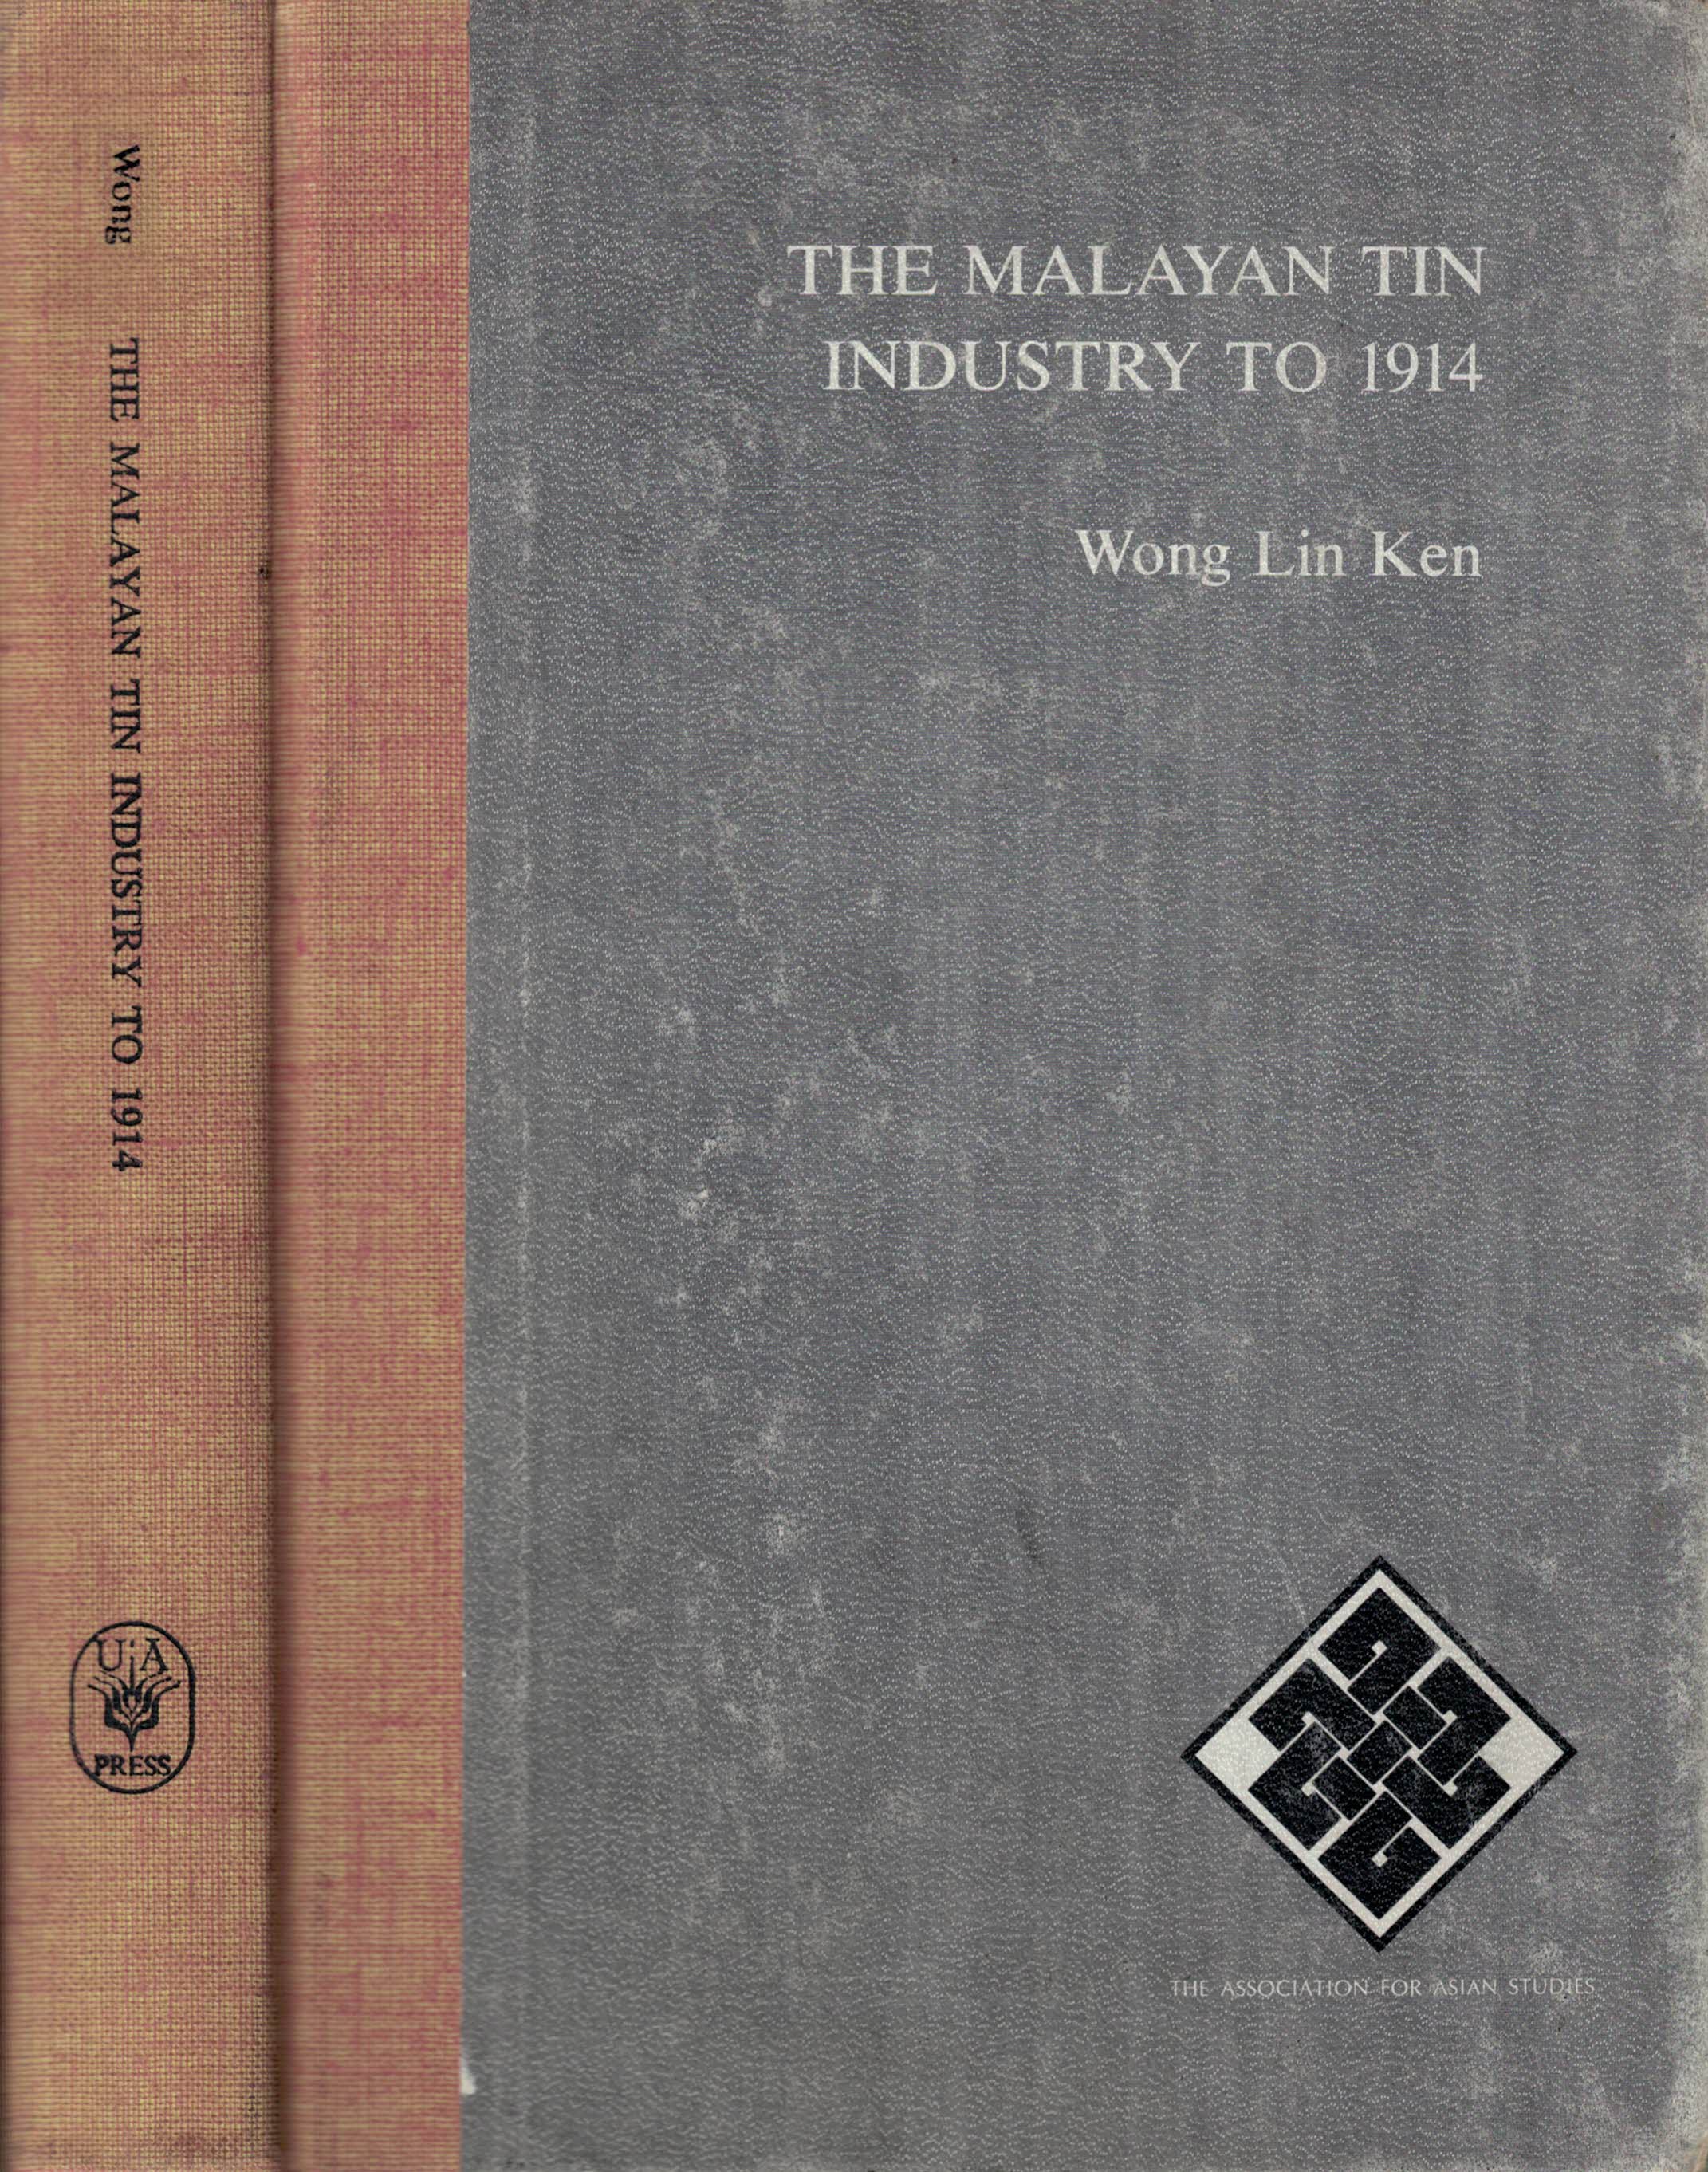 The Malayan Tin Industry to 1914. With Special Reference to the States of Perak, Selangor, Negri Sembilan and Pahang.